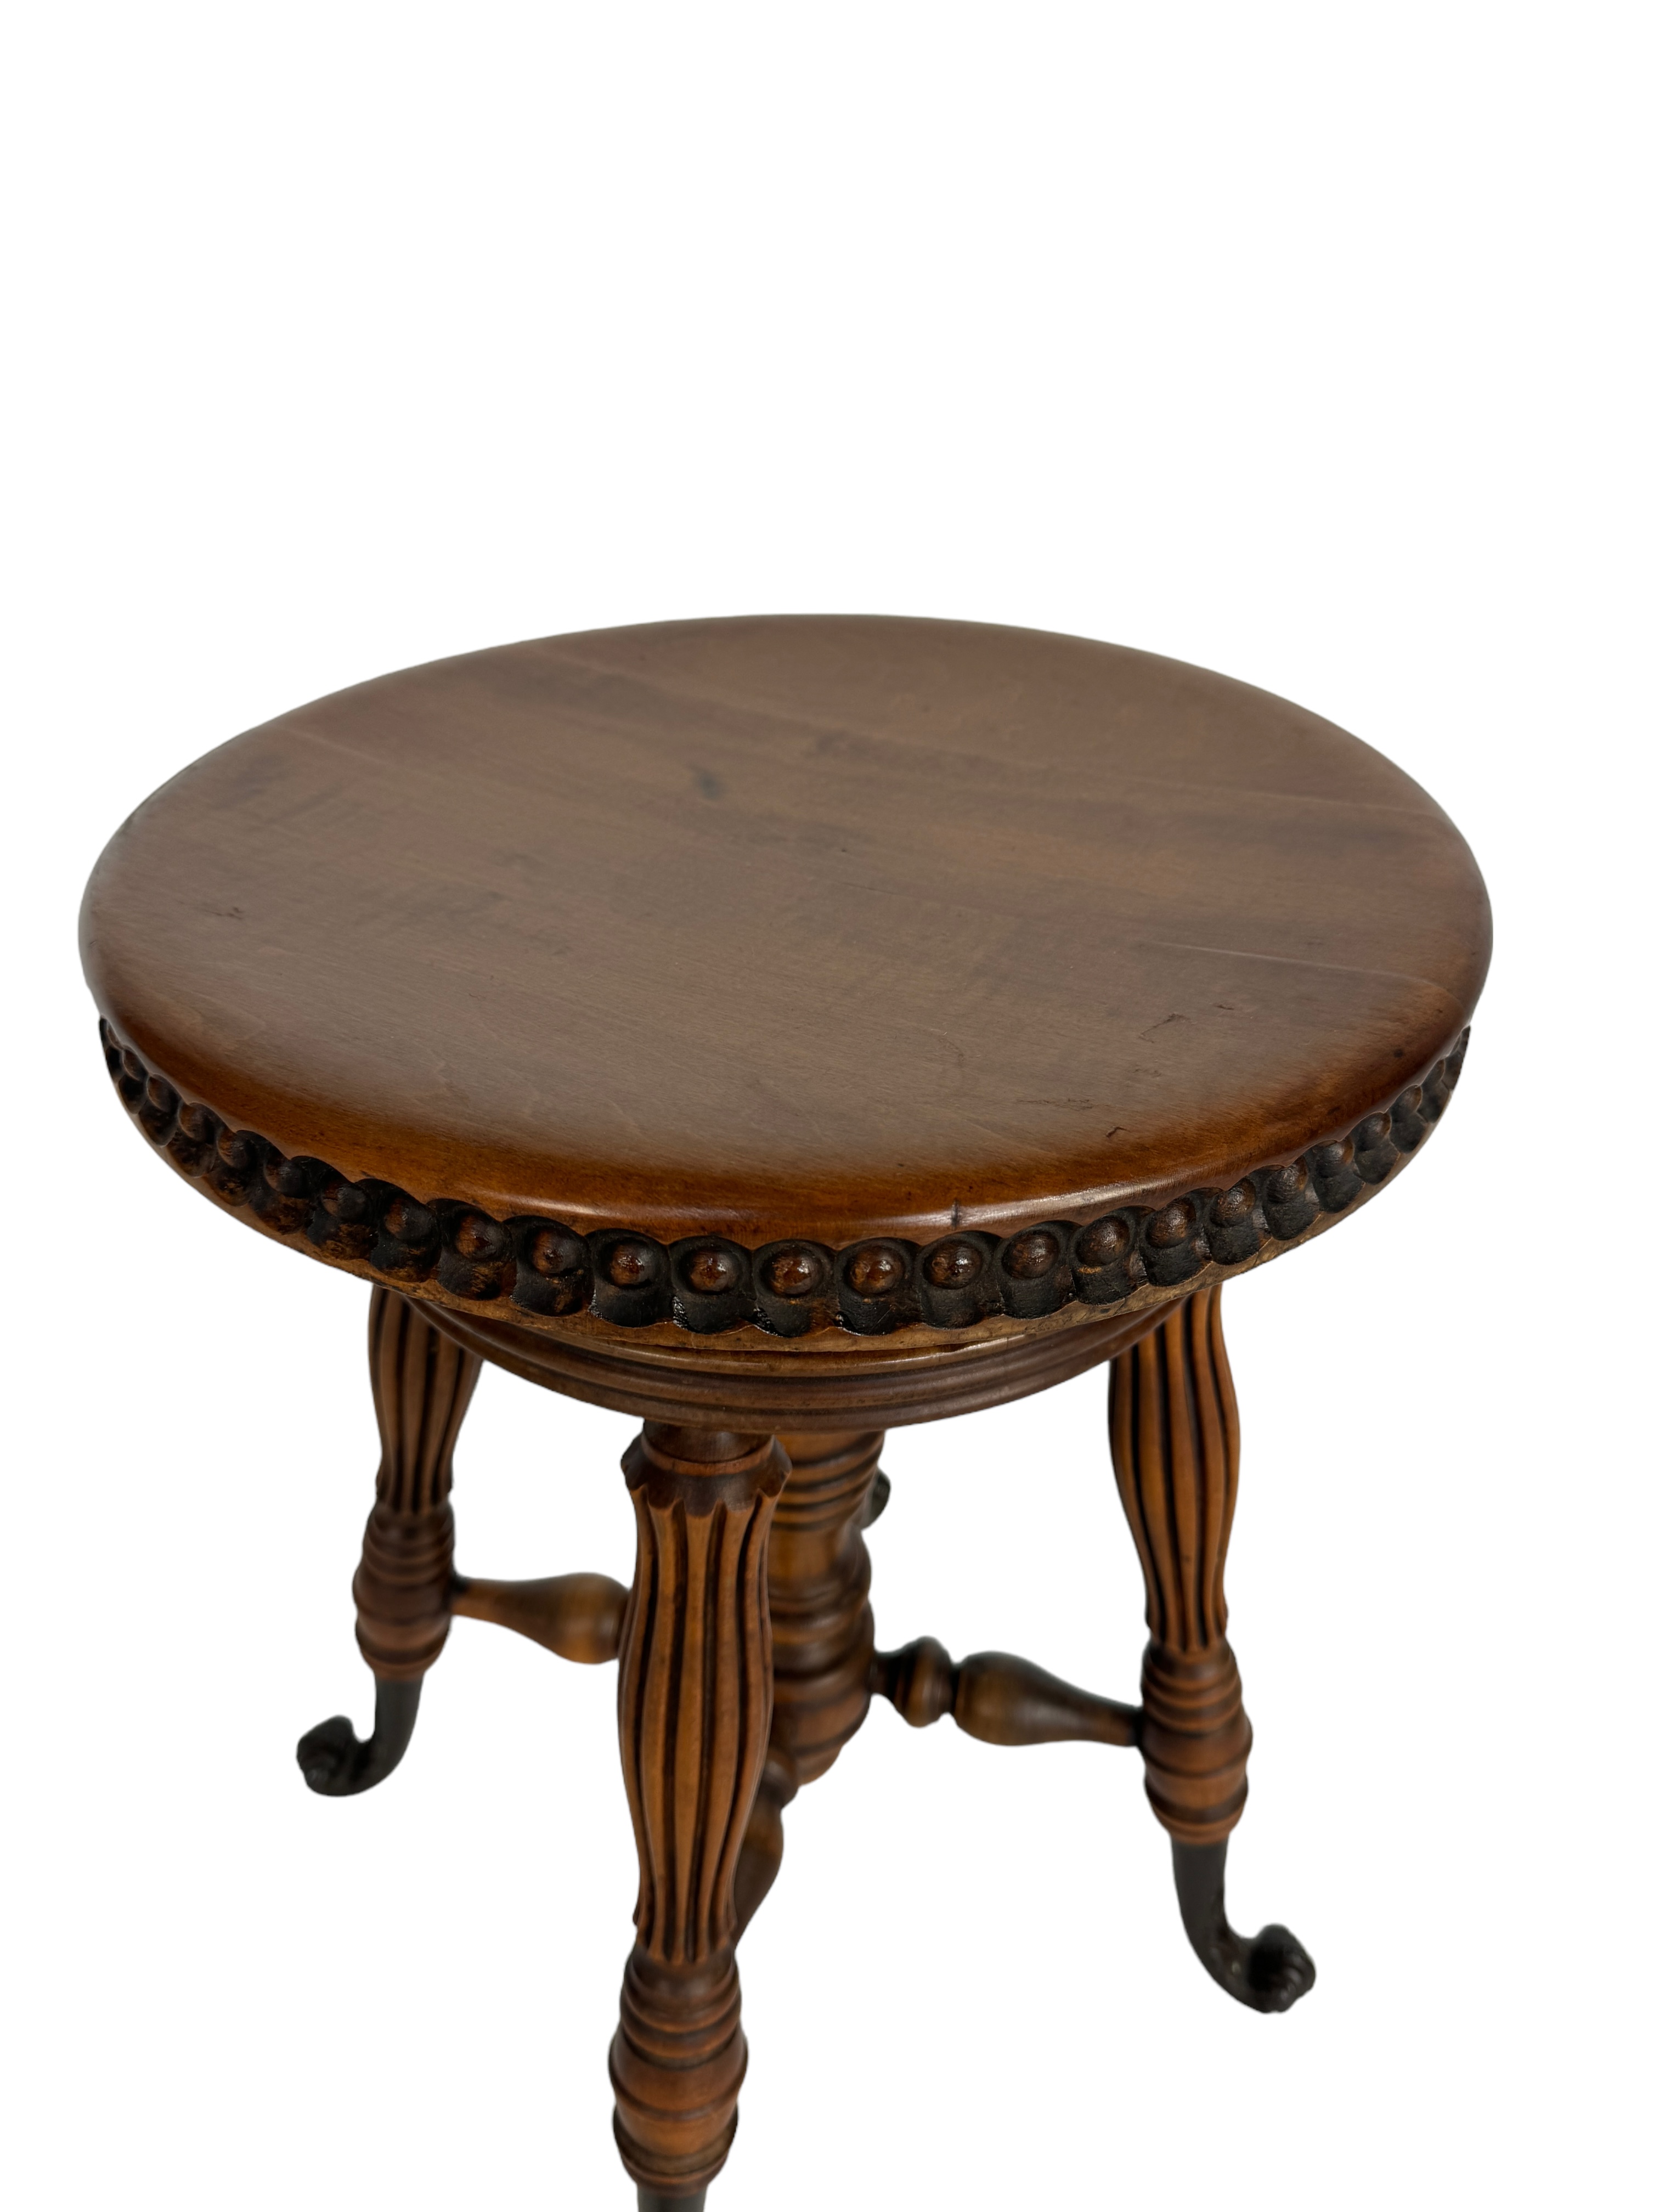 A late 19th century American beechwood circular revolving piano stool by Tonk of New York & Chicago - Image 4 of 5